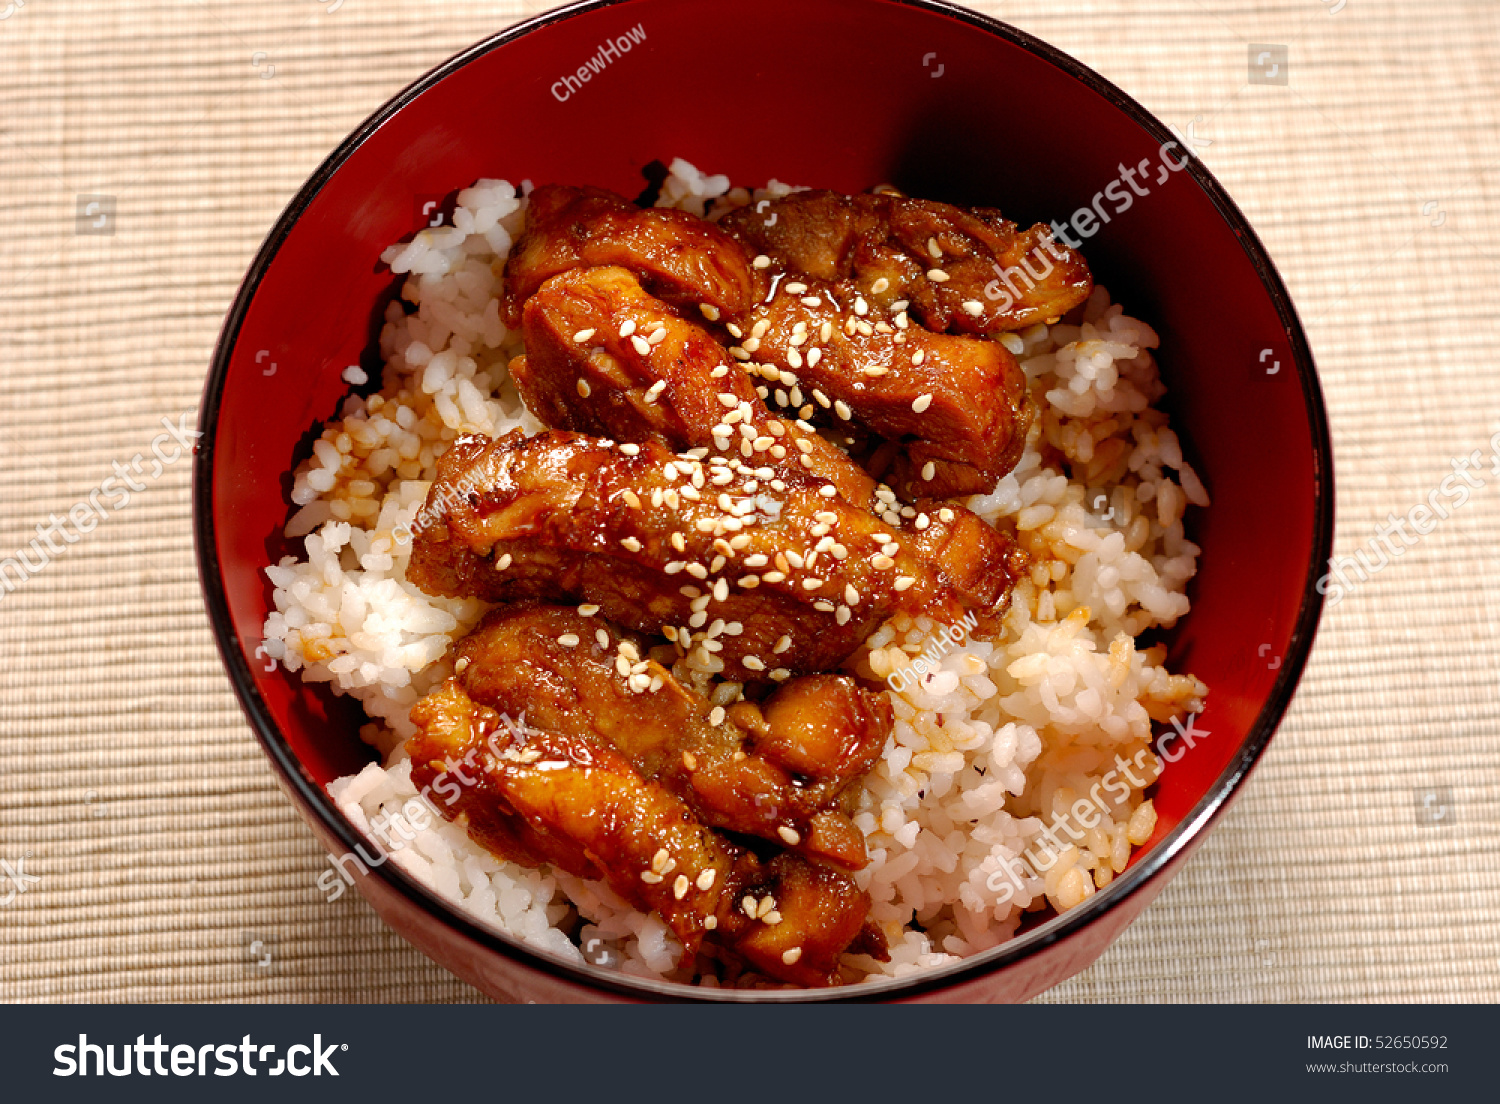 Japanese Deep Fried Chicken Rice Stock Photo (Edit Now) 52650592